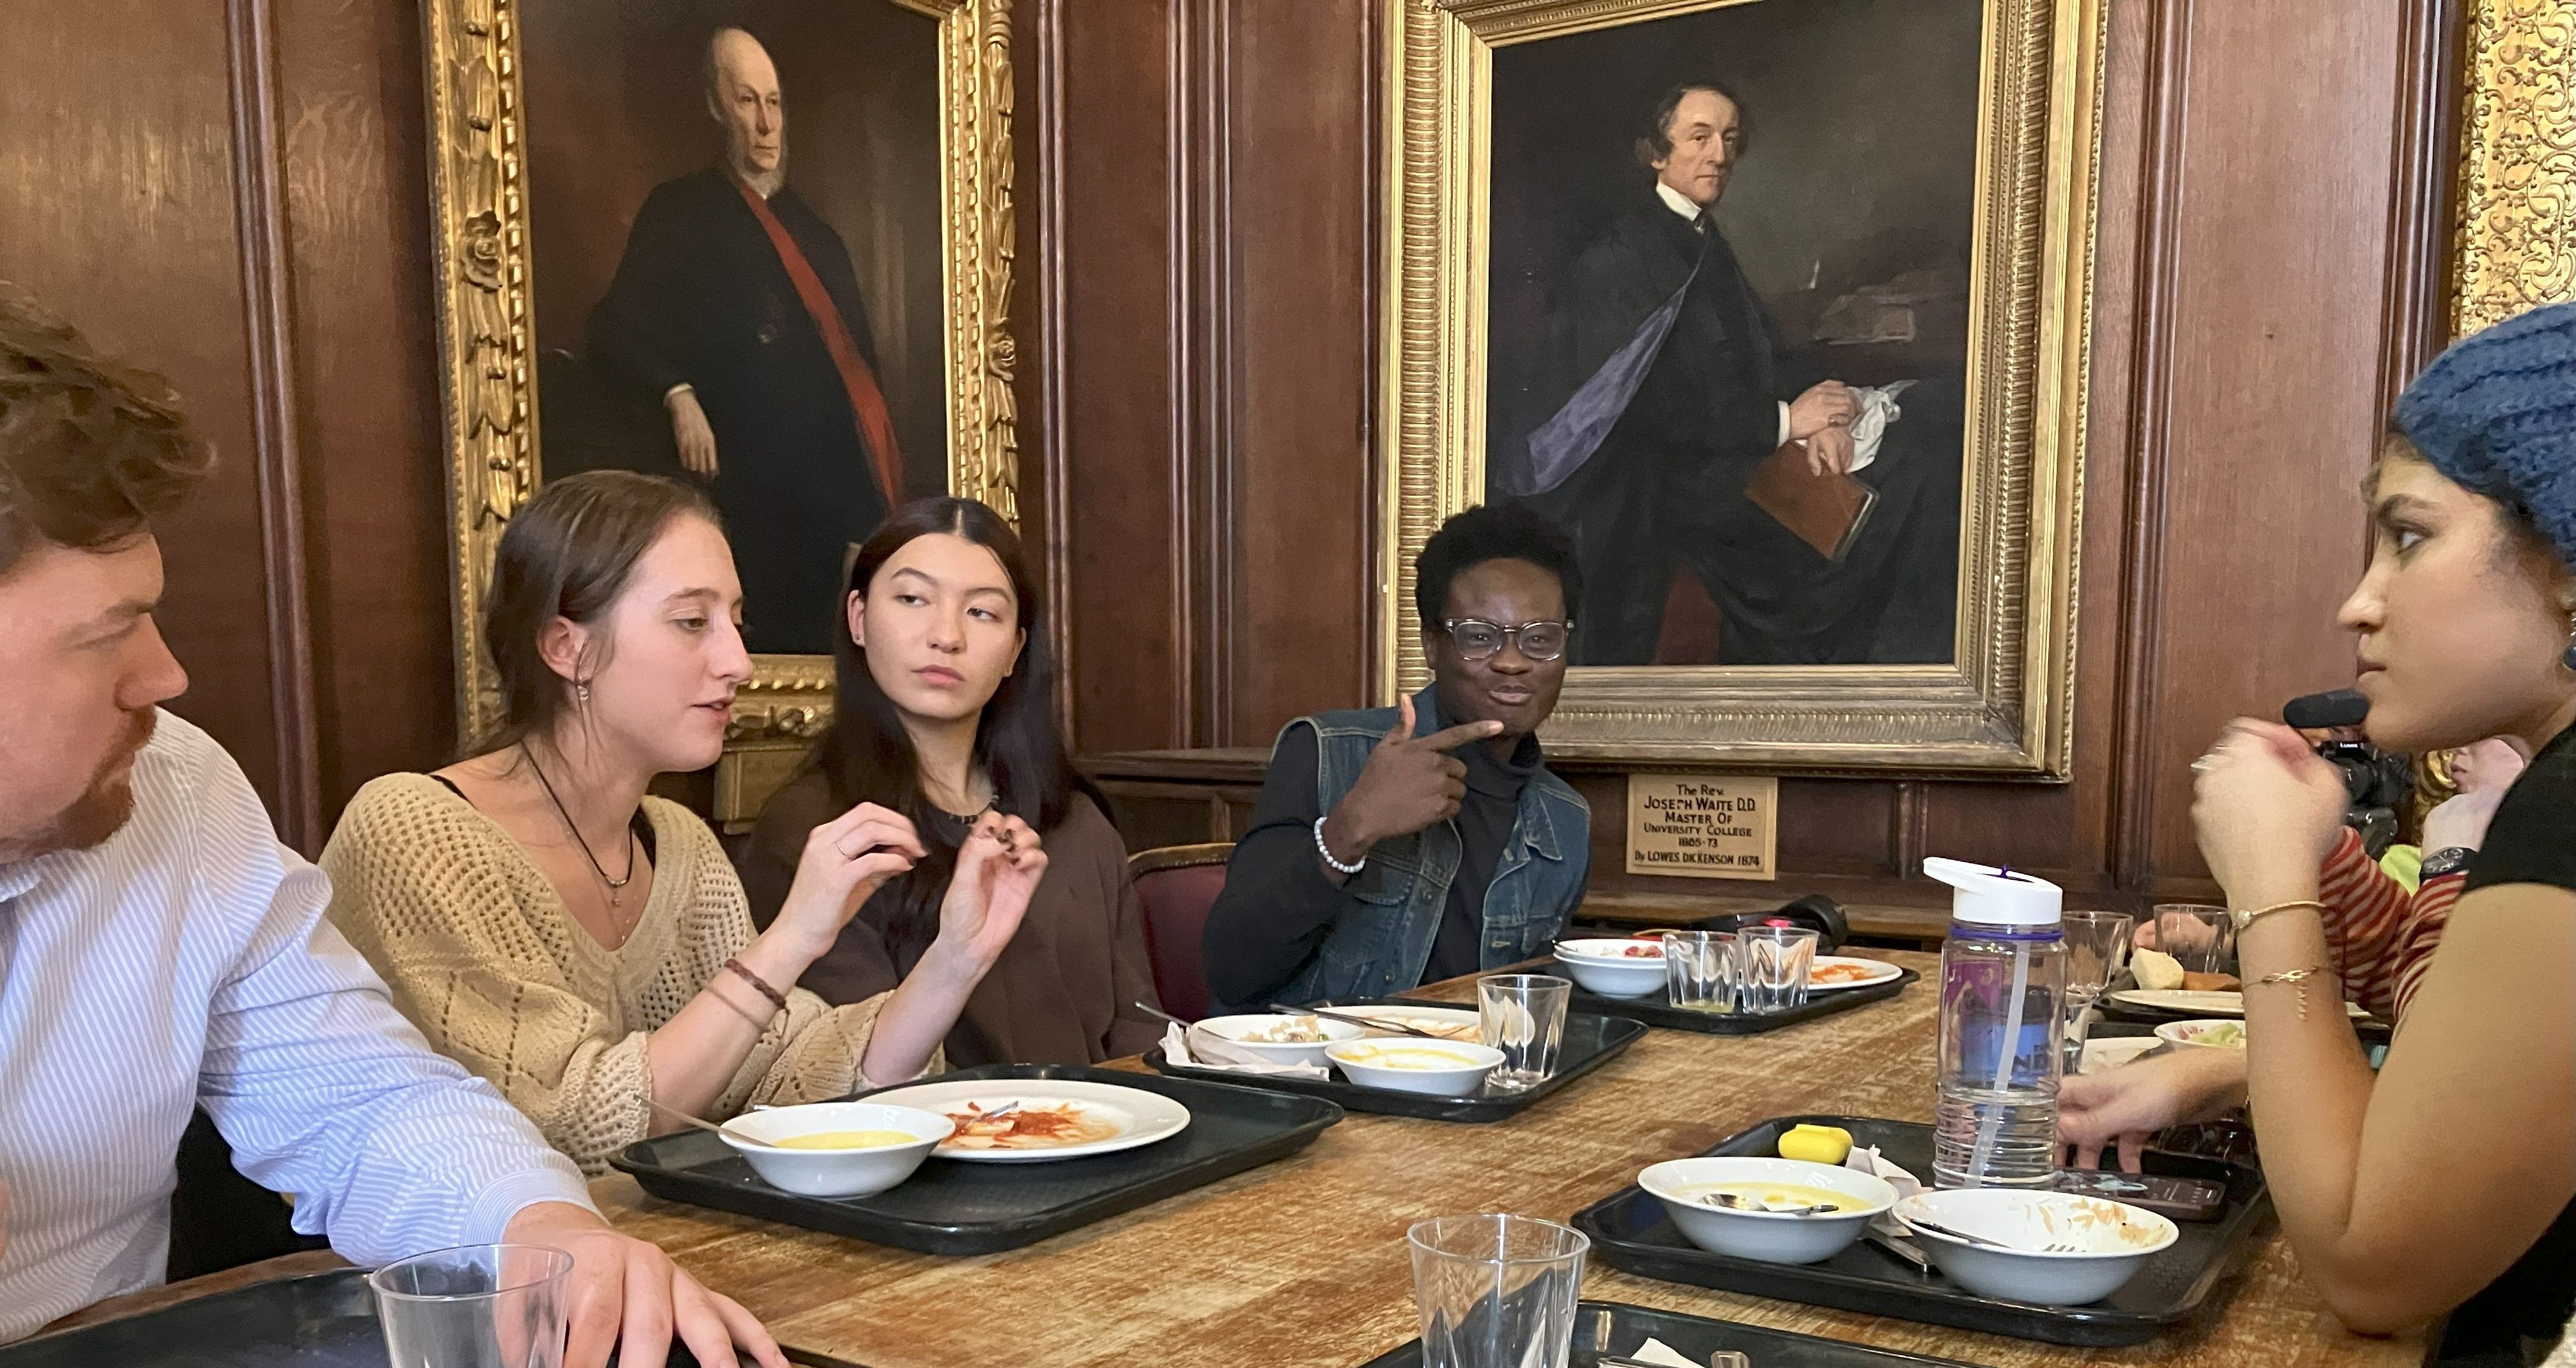 Meeting with the ‘Music Team’ over lunch at Castle Great Hall:   Lewis Wilkinson (Music Durham), Brooke Christiansen (president DUPO), Aysha Kojima (composer), Hannah Foster (Music editor Indigo), Michael Kohn (conductor DUPO) and others.